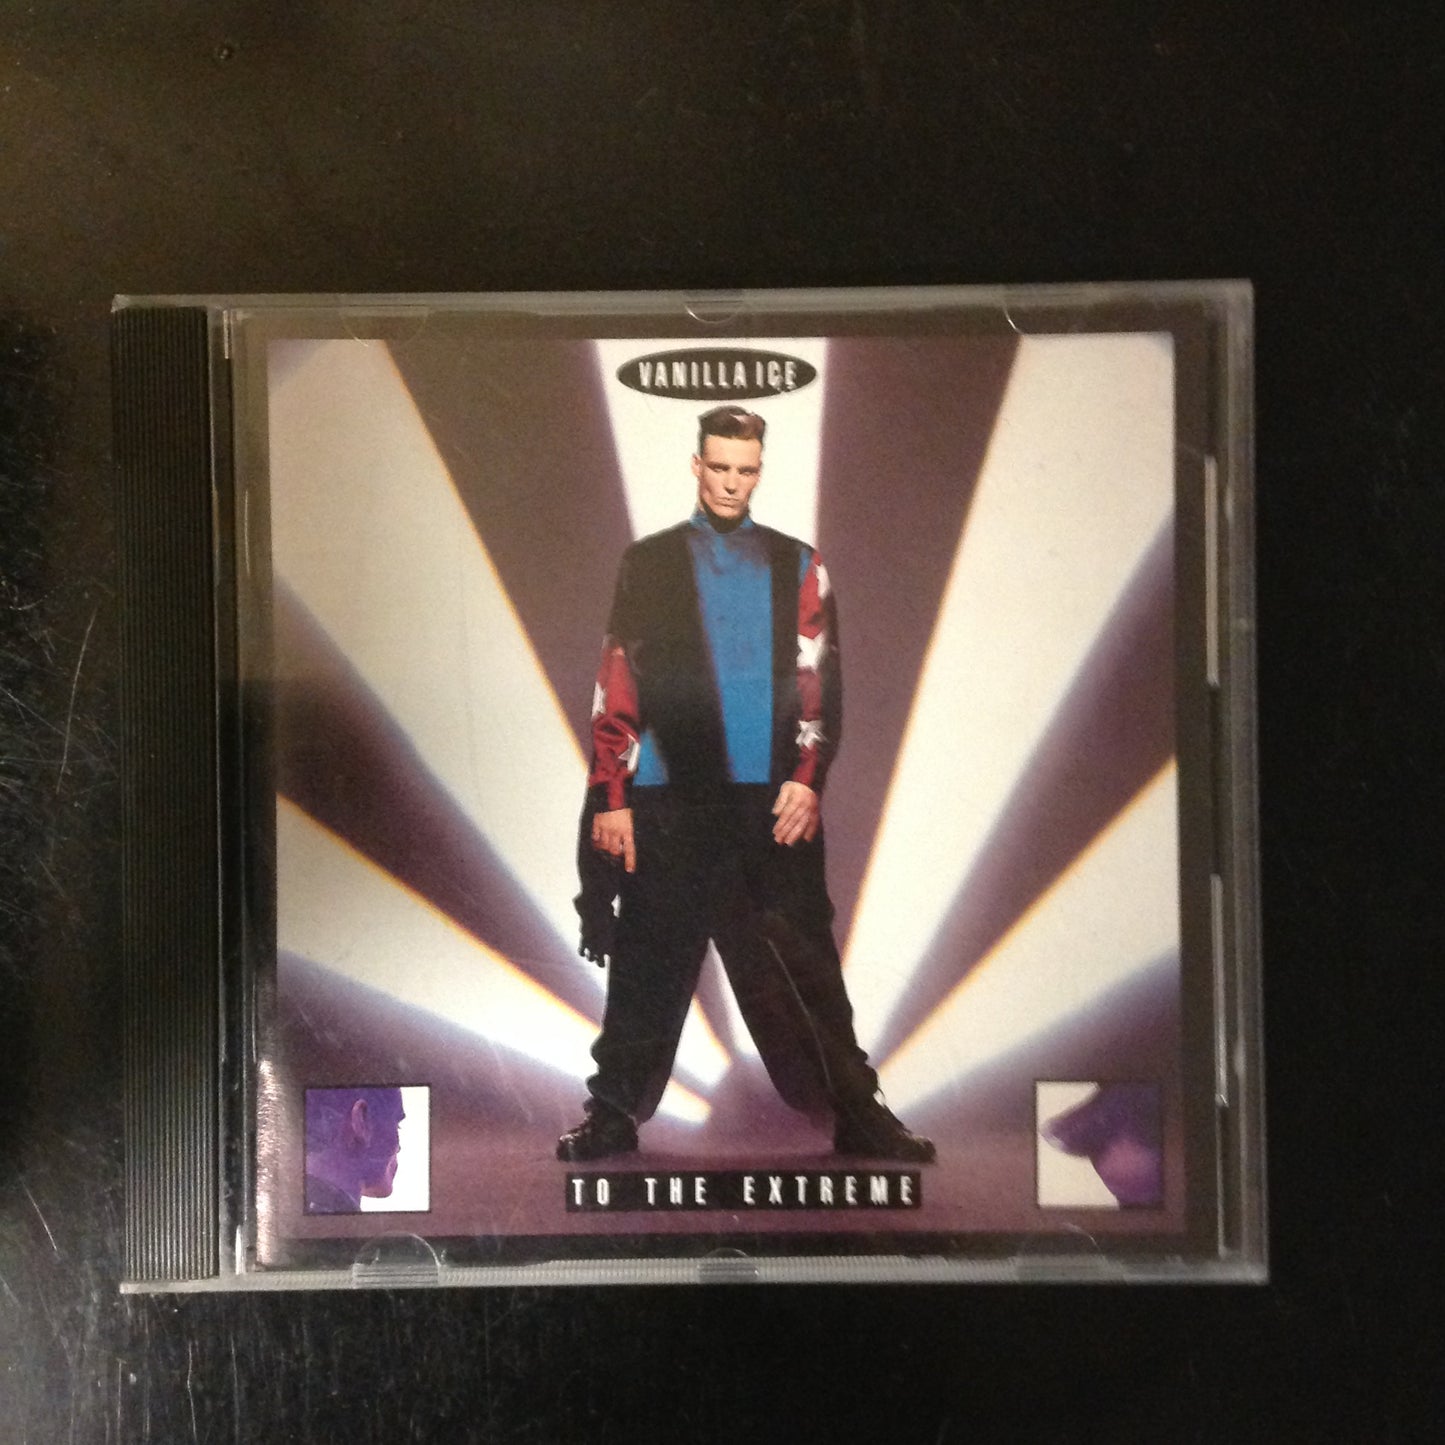 BARGAIN CD Vanilla Ice To The Extreme CDP-95325